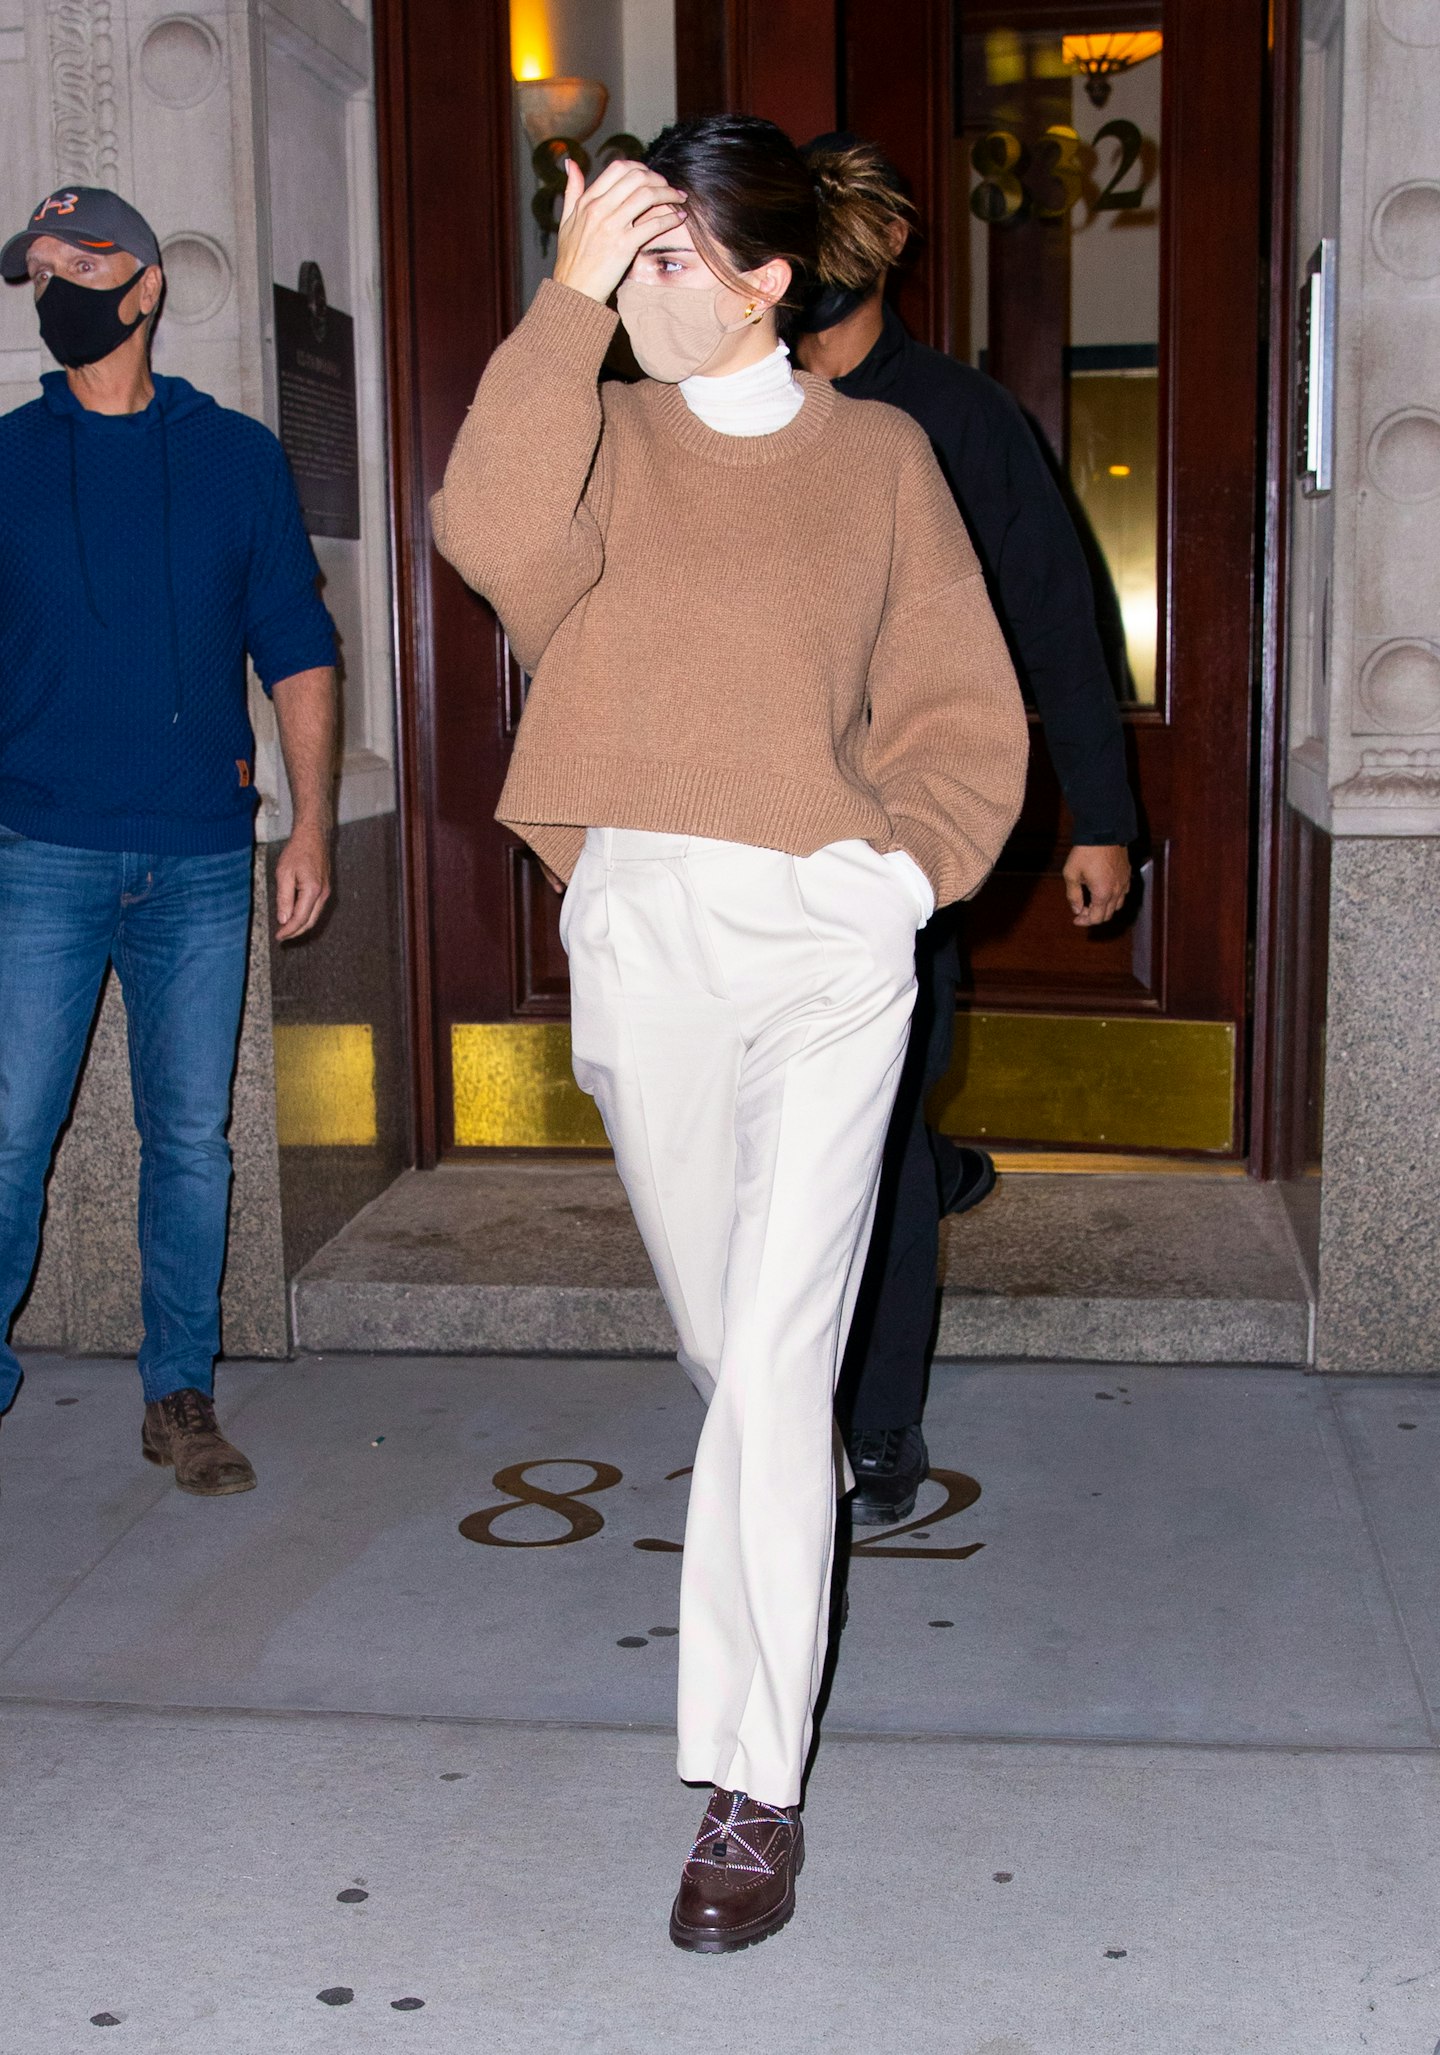 Kendall Jenner's Outfits Made Us Want To Get Dressed Again